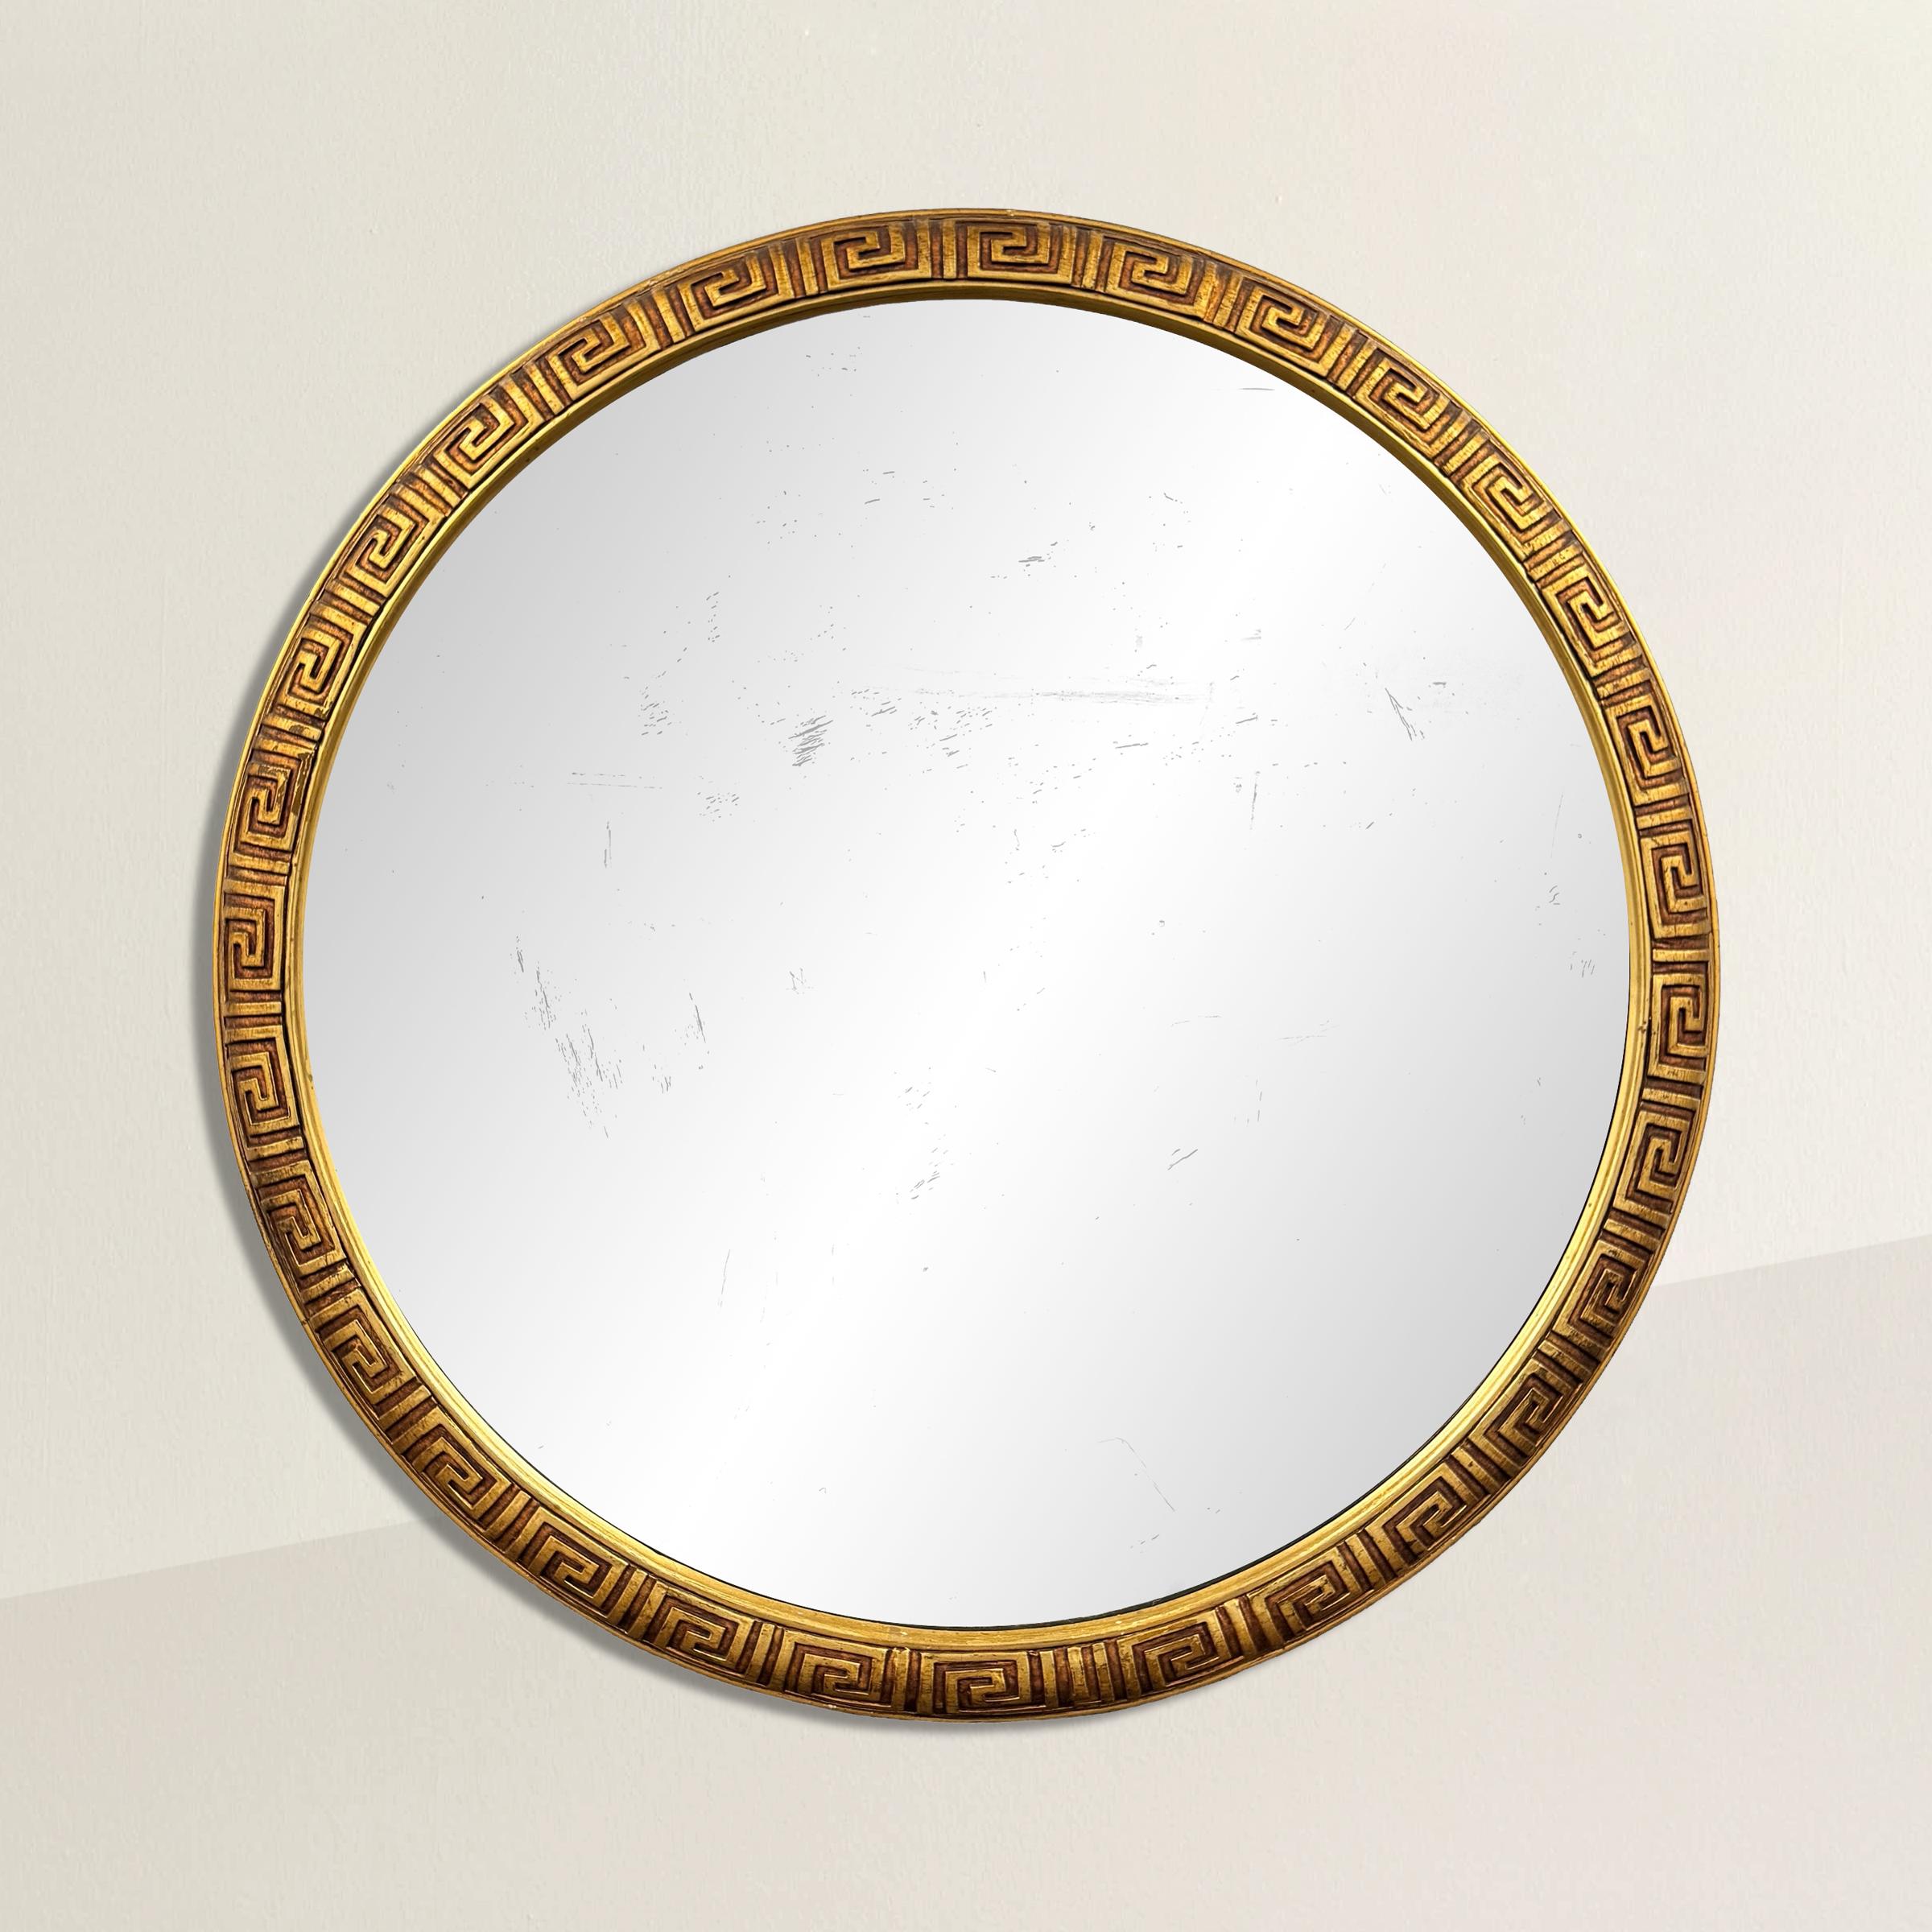 This mid-20th century American round mirror boasts a gilt wood frame intricately carved with a timeless Greek Key pattern. The Greek Key motif, derived from ancient Greek architecture and design, symbolizes unity, continuity, and the eternal flow of